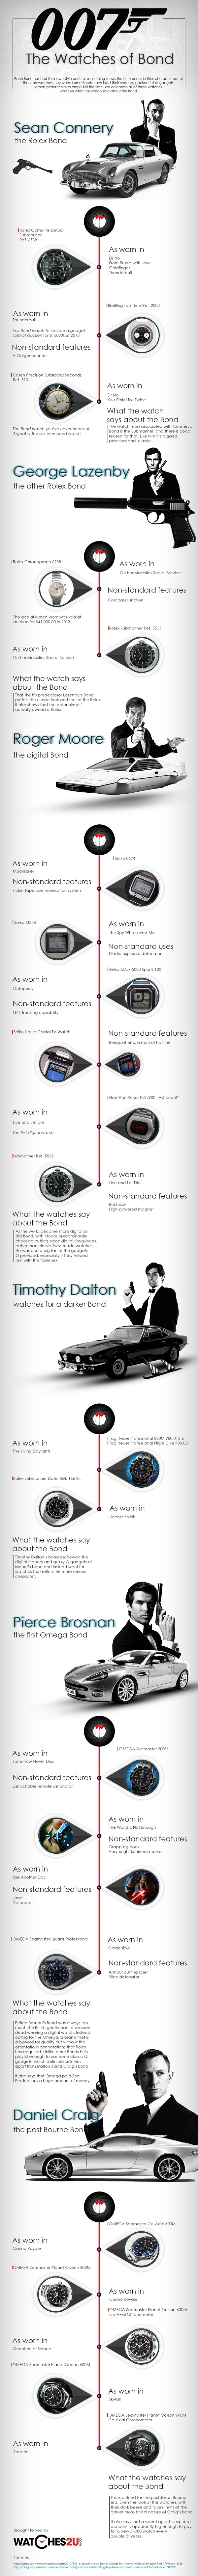 All The Watches of James Bond